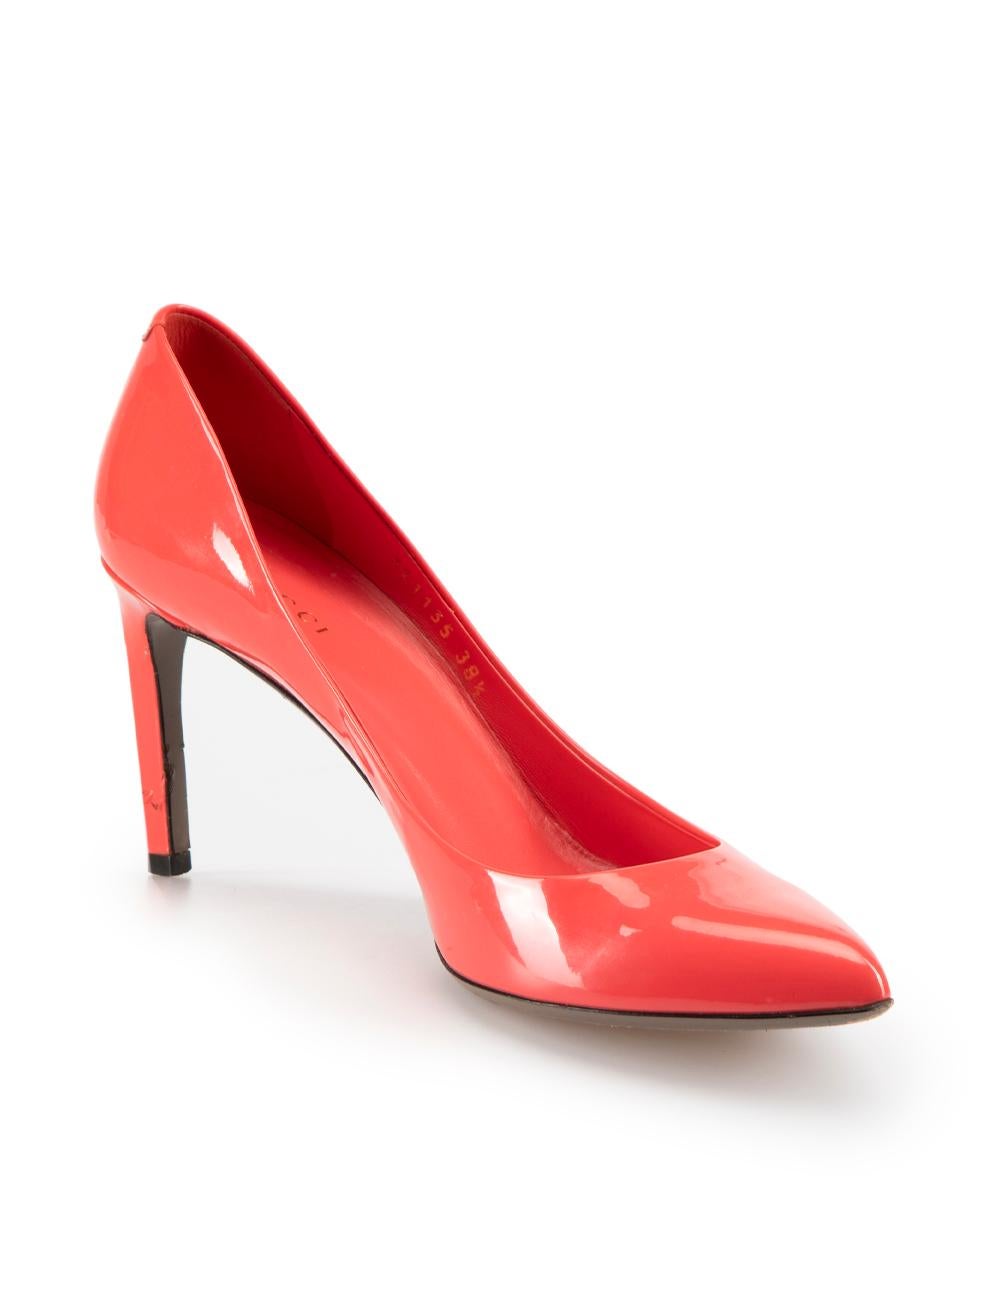 CONDITION is Good. Minor wear to heels is evident. Light wear to inner and outer soles and small indents to back of heels on this used Gucci designer resale item.



Details


Coral

Patent leather

Slip-on heels

Point-toe

High-heeled



 

Made